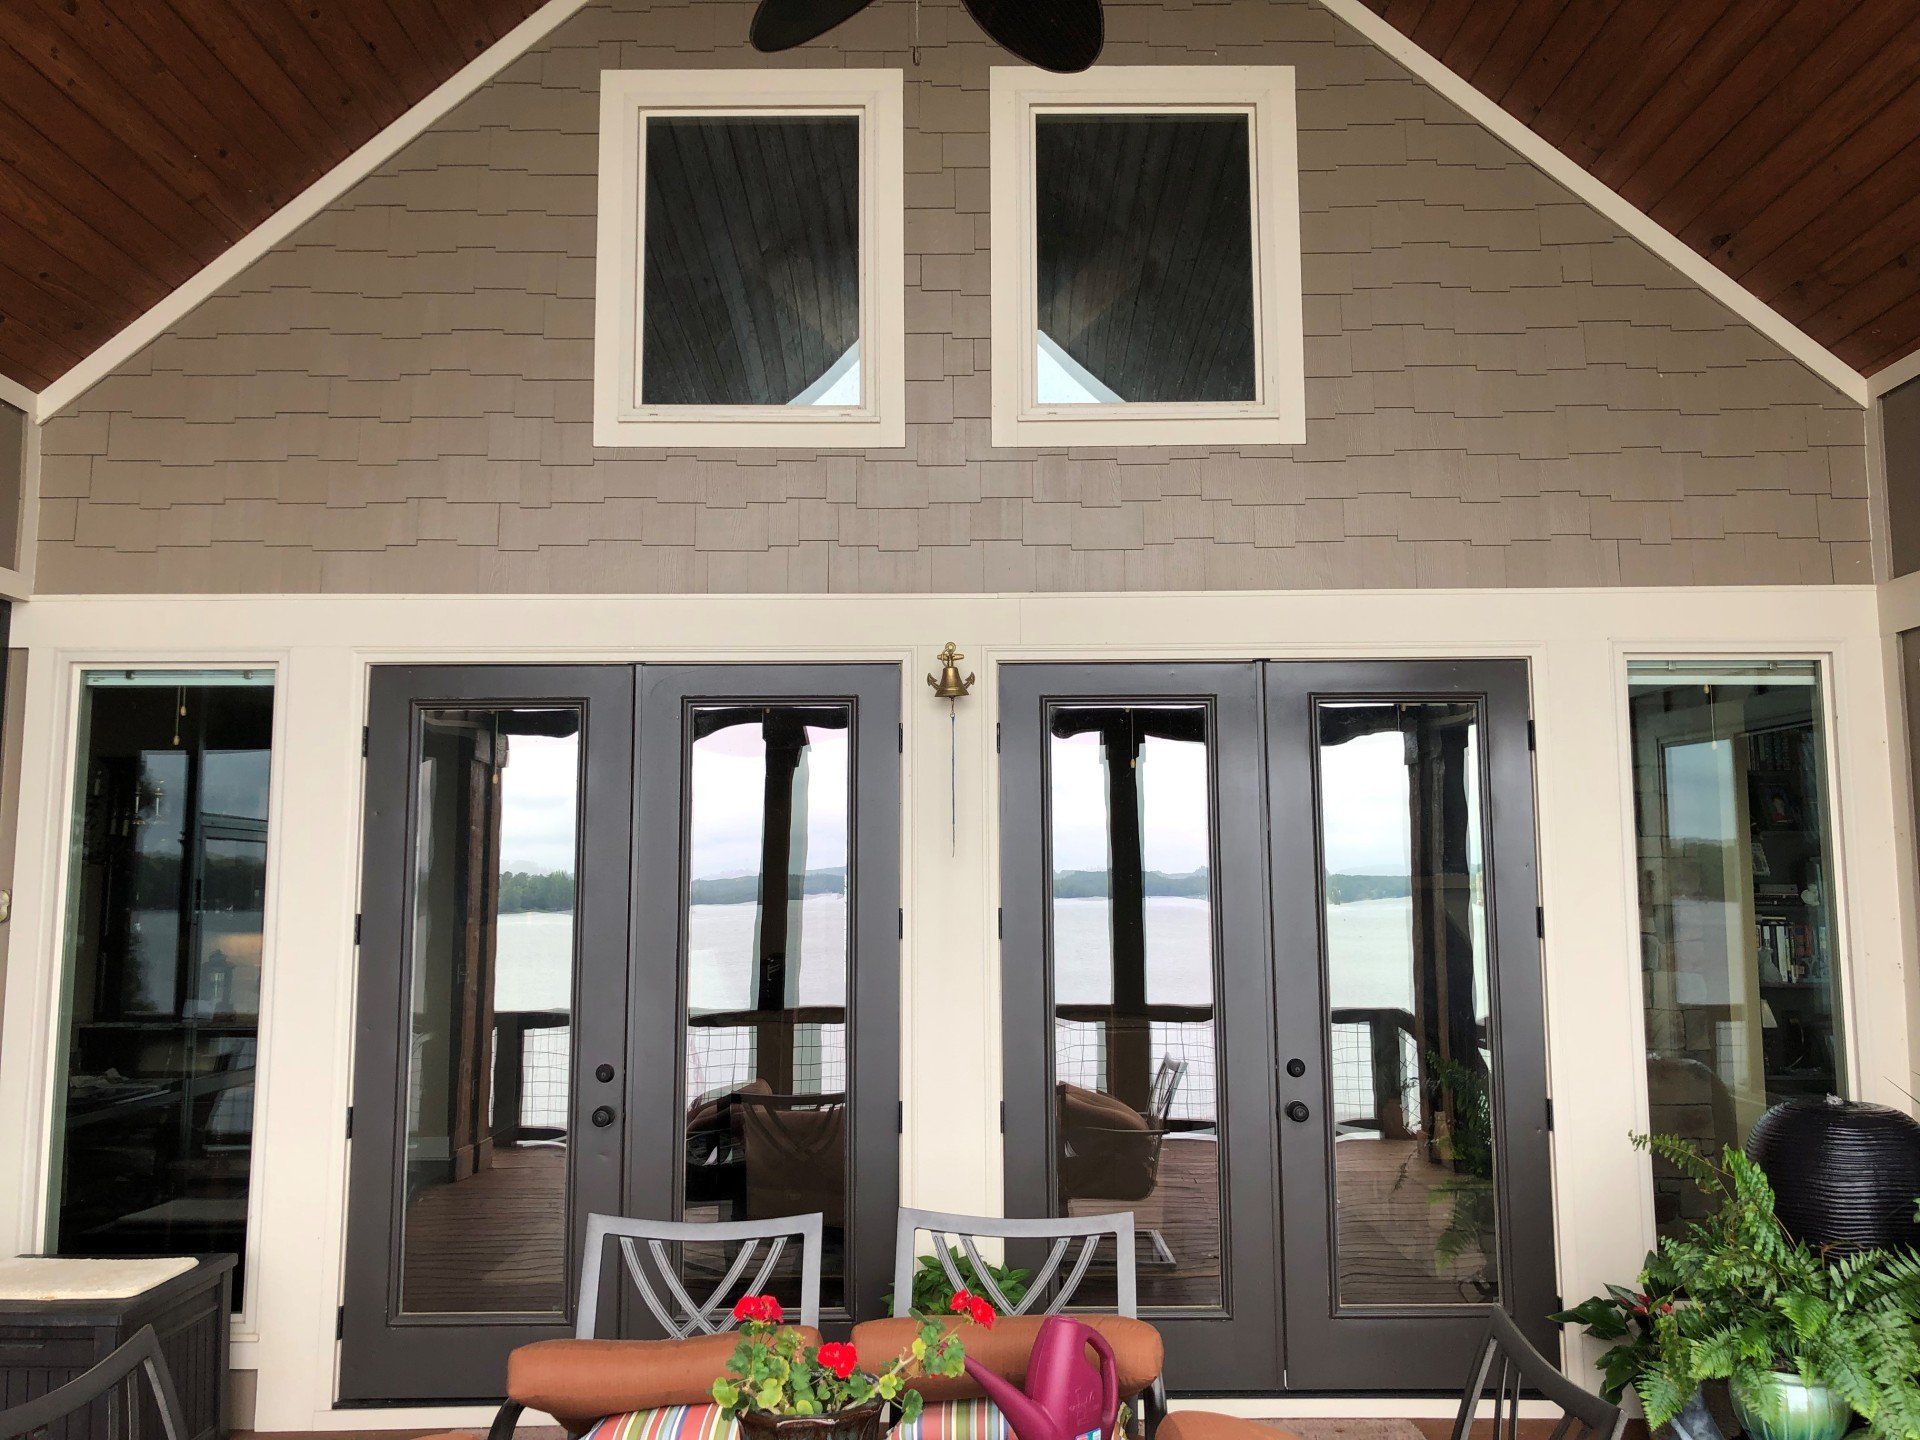 The view was great looking out over the lake, except for the glare and heat penetration before SPF Tint was installed at residence on Lake Martin in Alabama